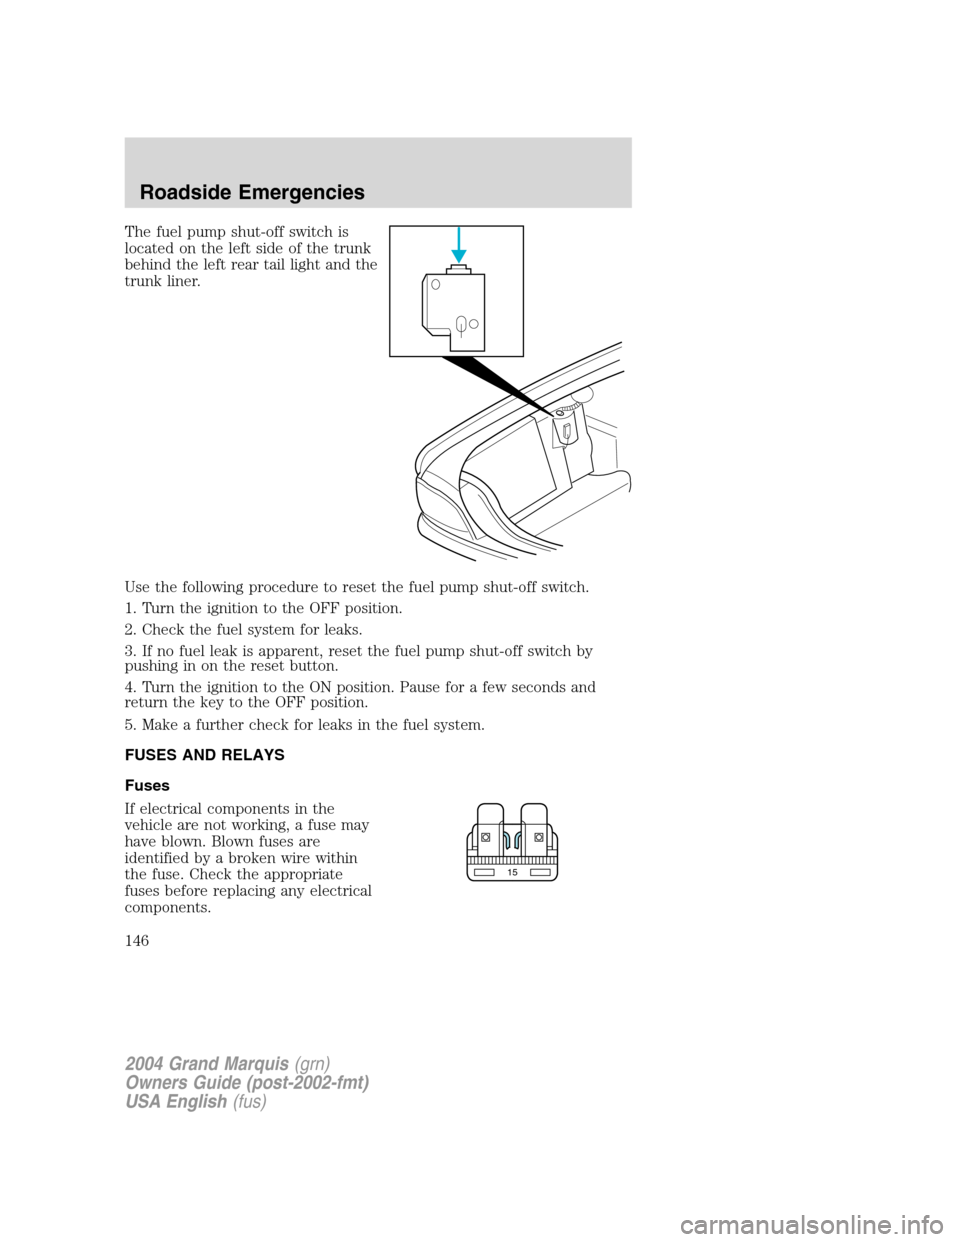 Mercury Grand Marquis 2004  Owners Manuals The fuel pump shut-off switch is
located on the left side of the trunk
behind the left rear tail light and the
trunk liner.
Use the following procedure to reset the fuel pump shut-off switch.
1. Turn 